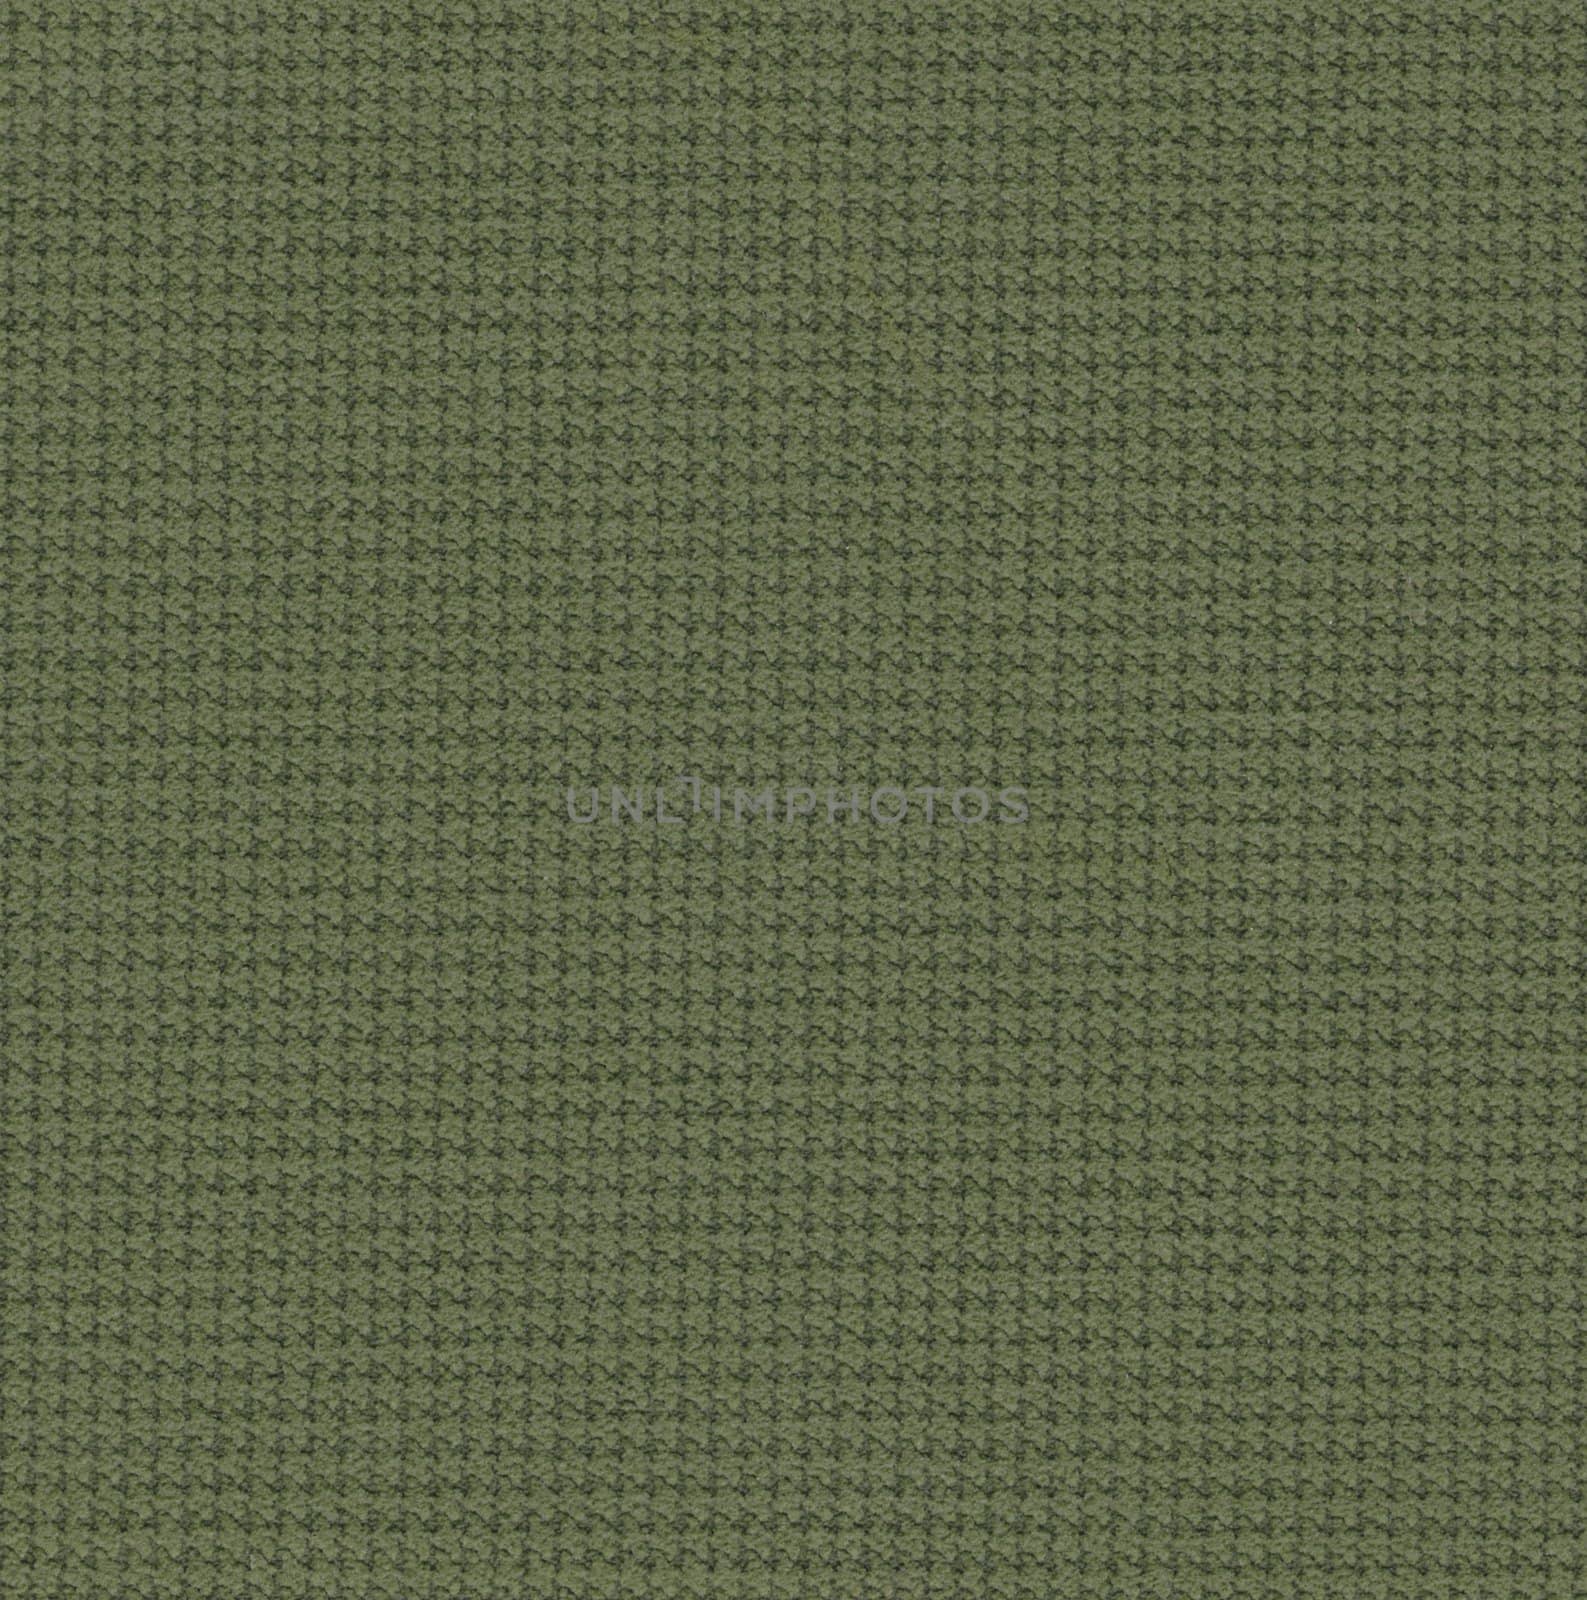 Dark Green fabric texture background by mg1408